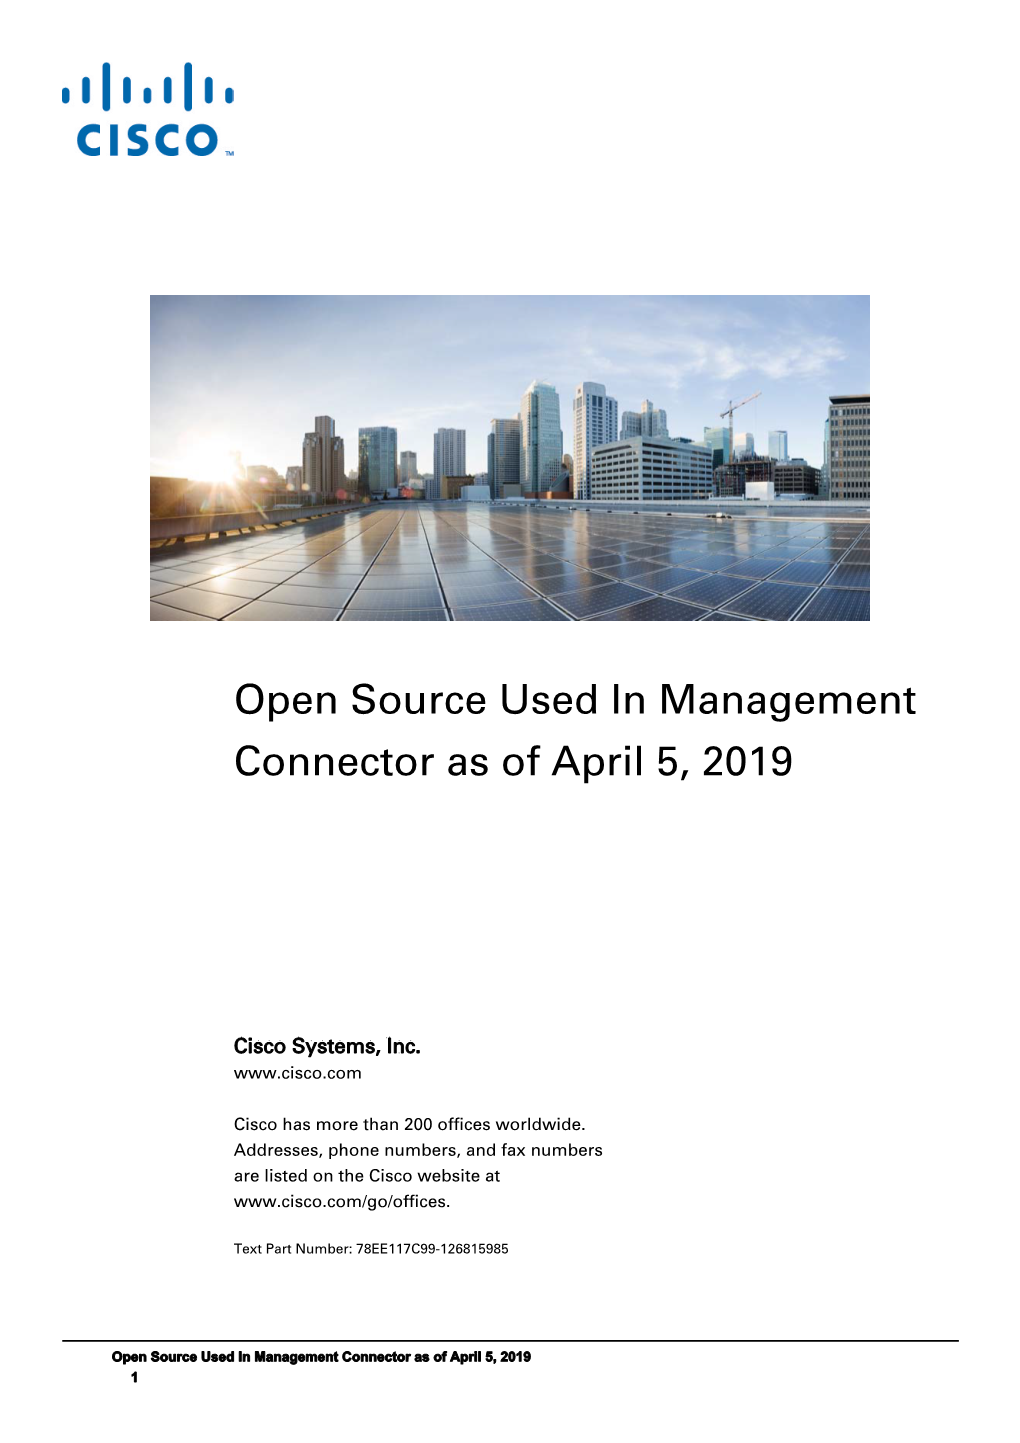 Open Source Used in Management Connector As of April 5, 2019